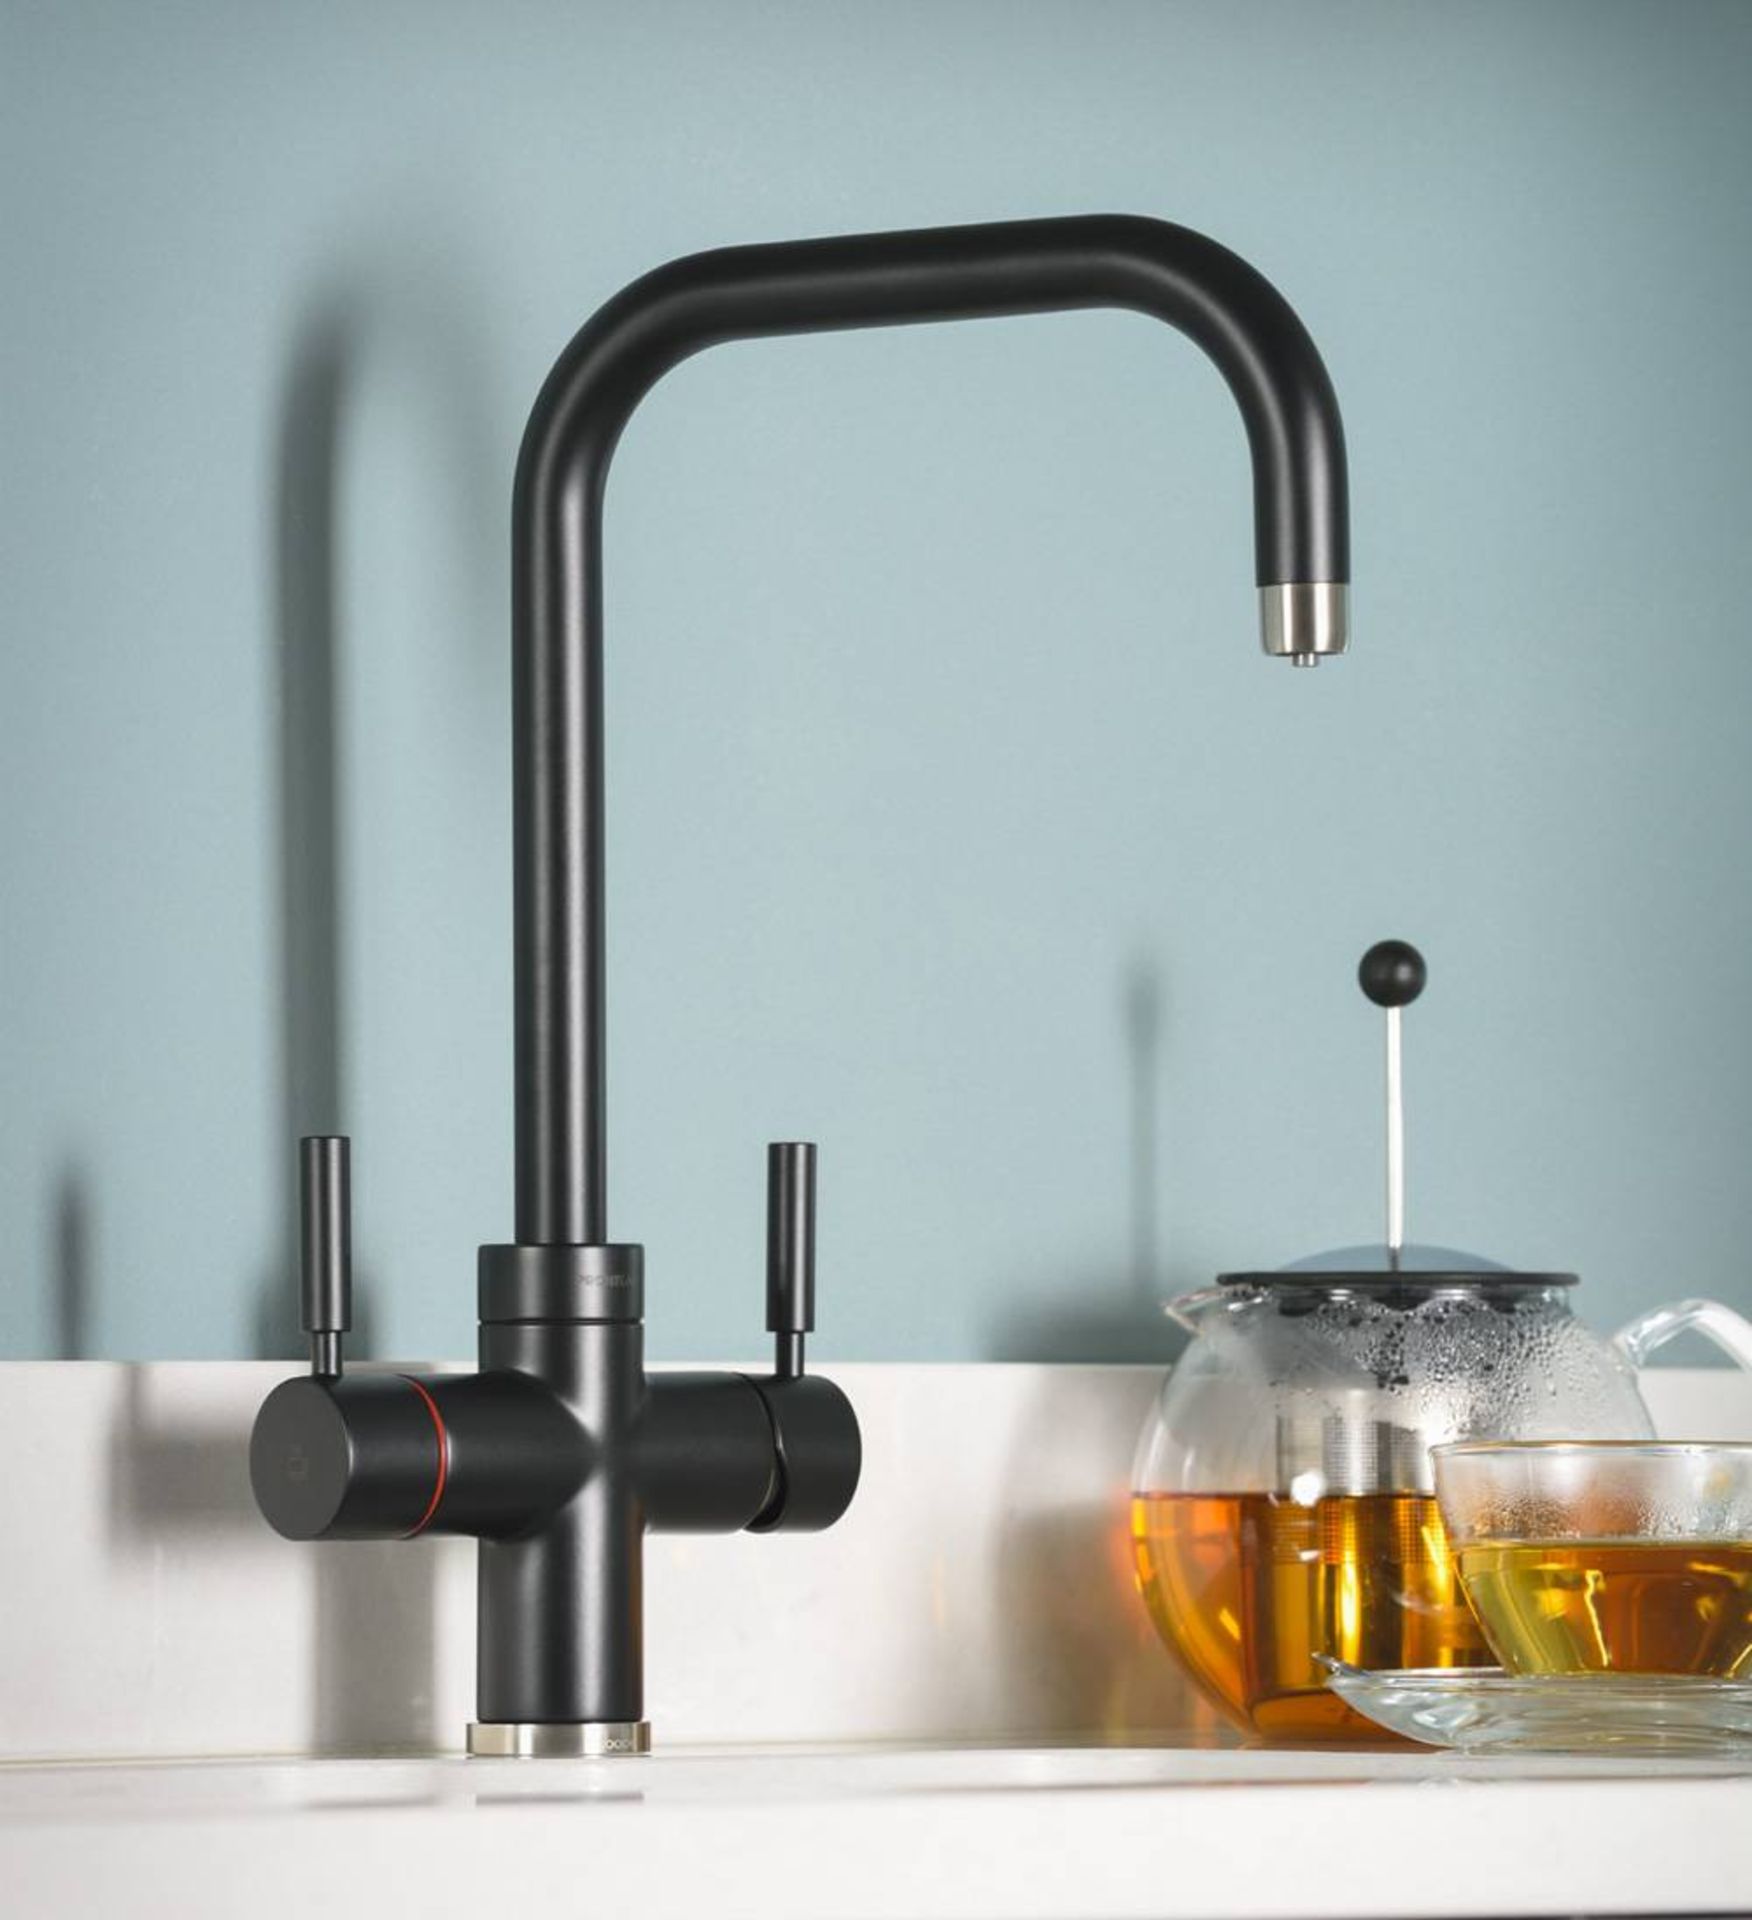 NEW (F156) Abode Propure Matt Black 4in1 Boiling Hot Water Quad Spout Kitchen Sink Tap. RRP £9...